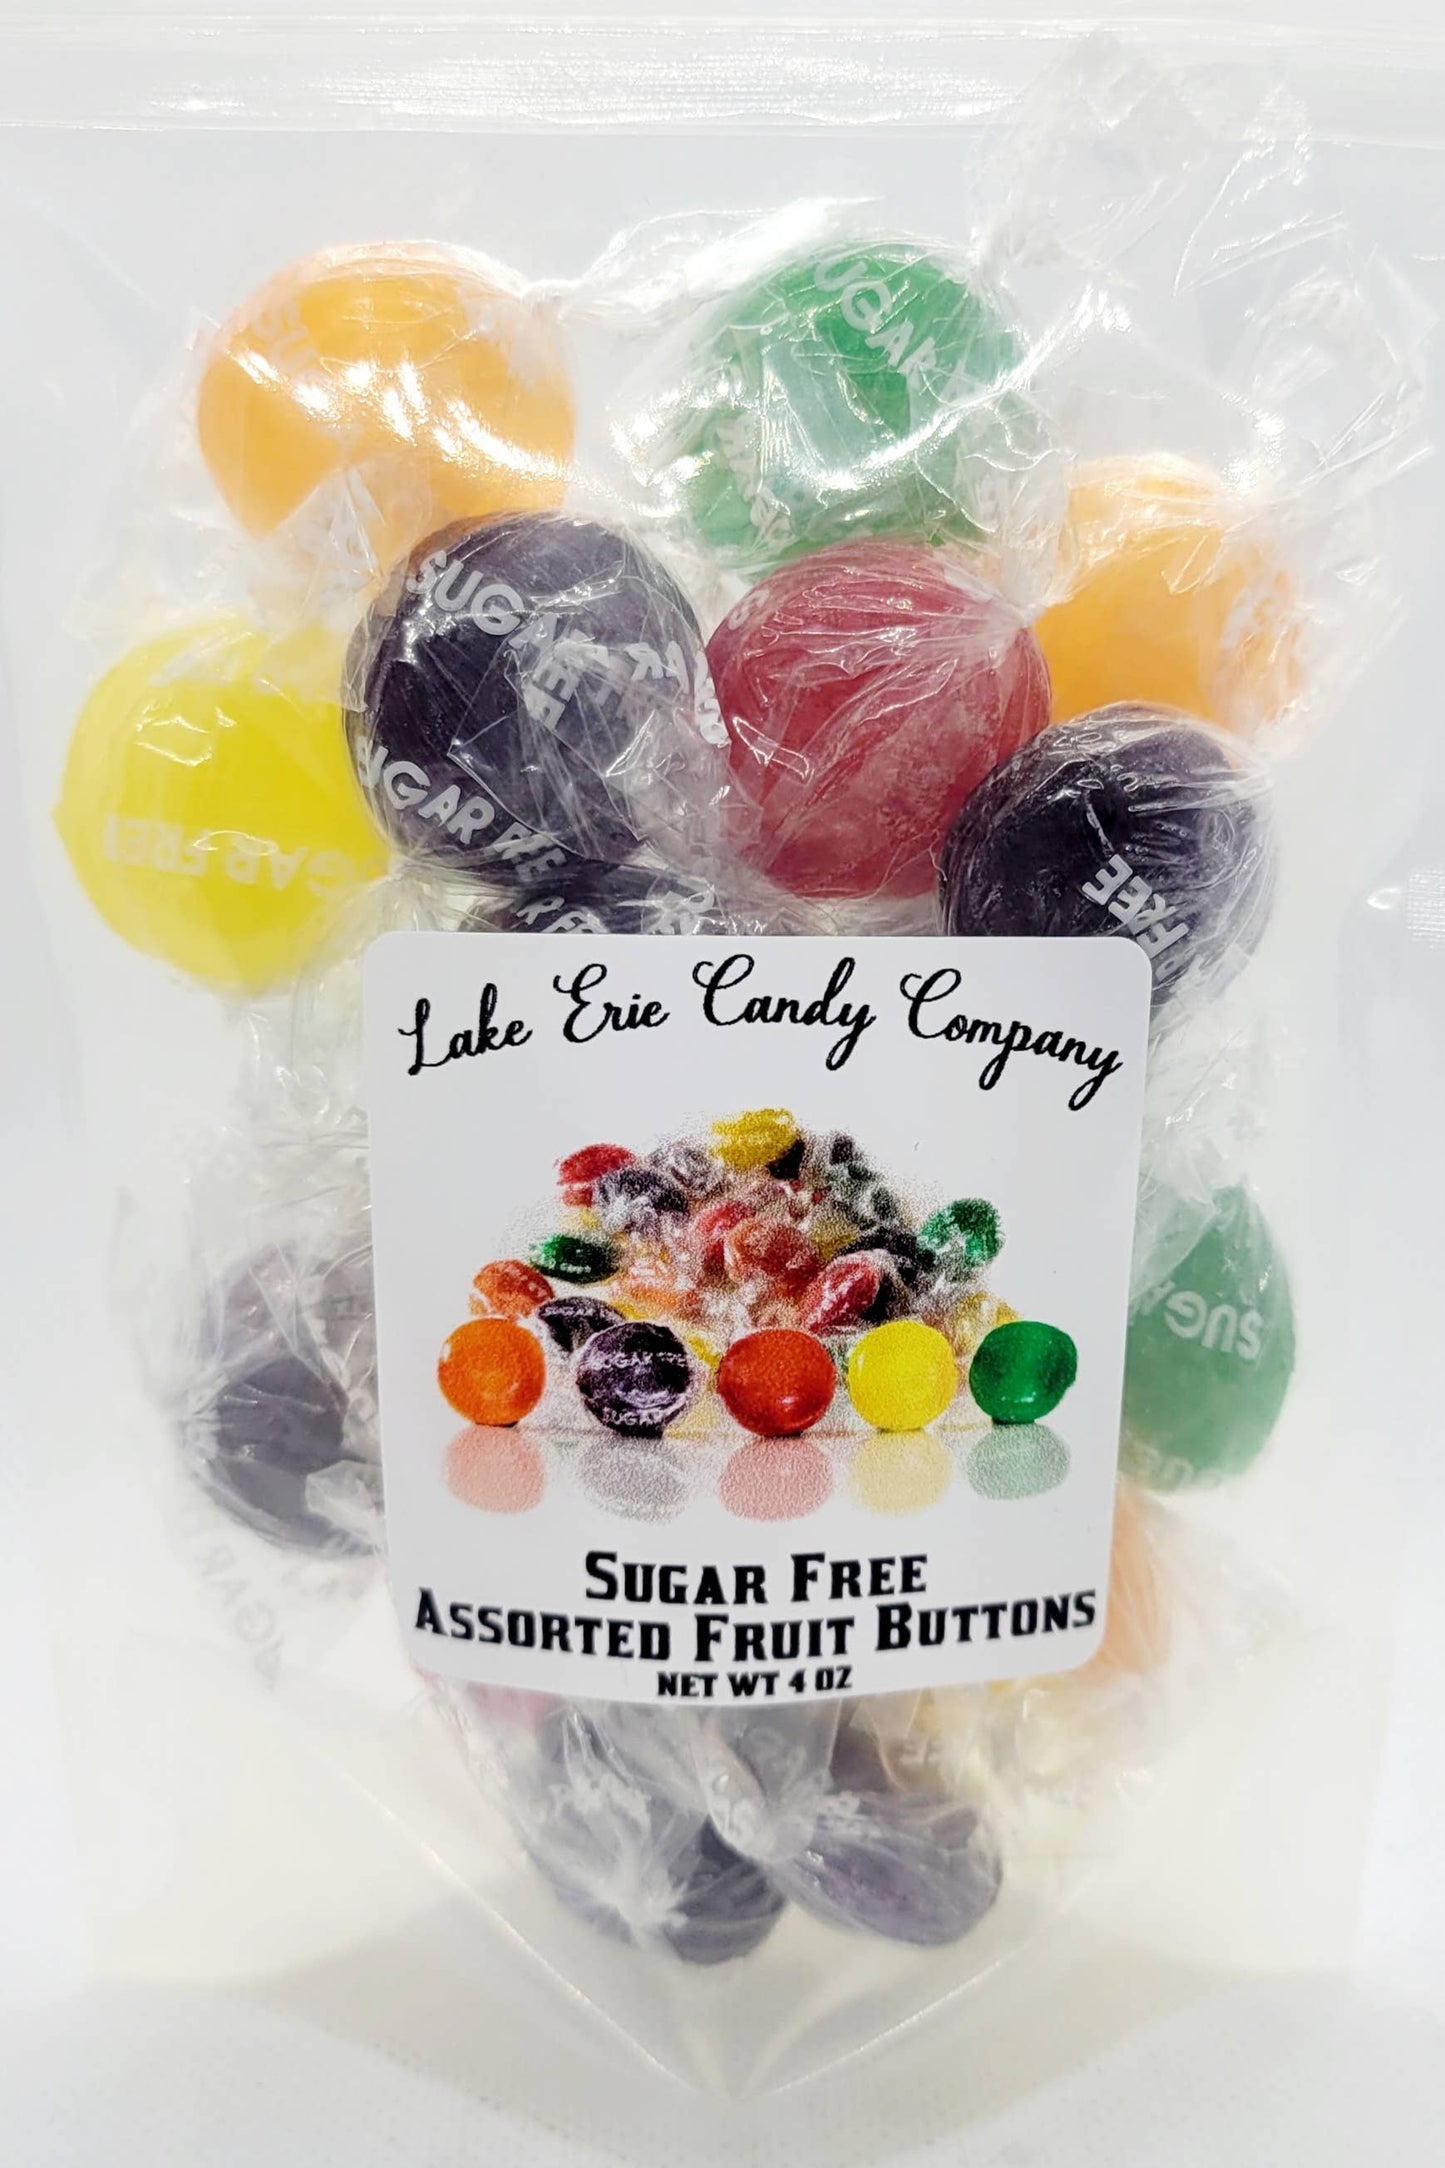 Sugar Free Assorted Fruit Buttons